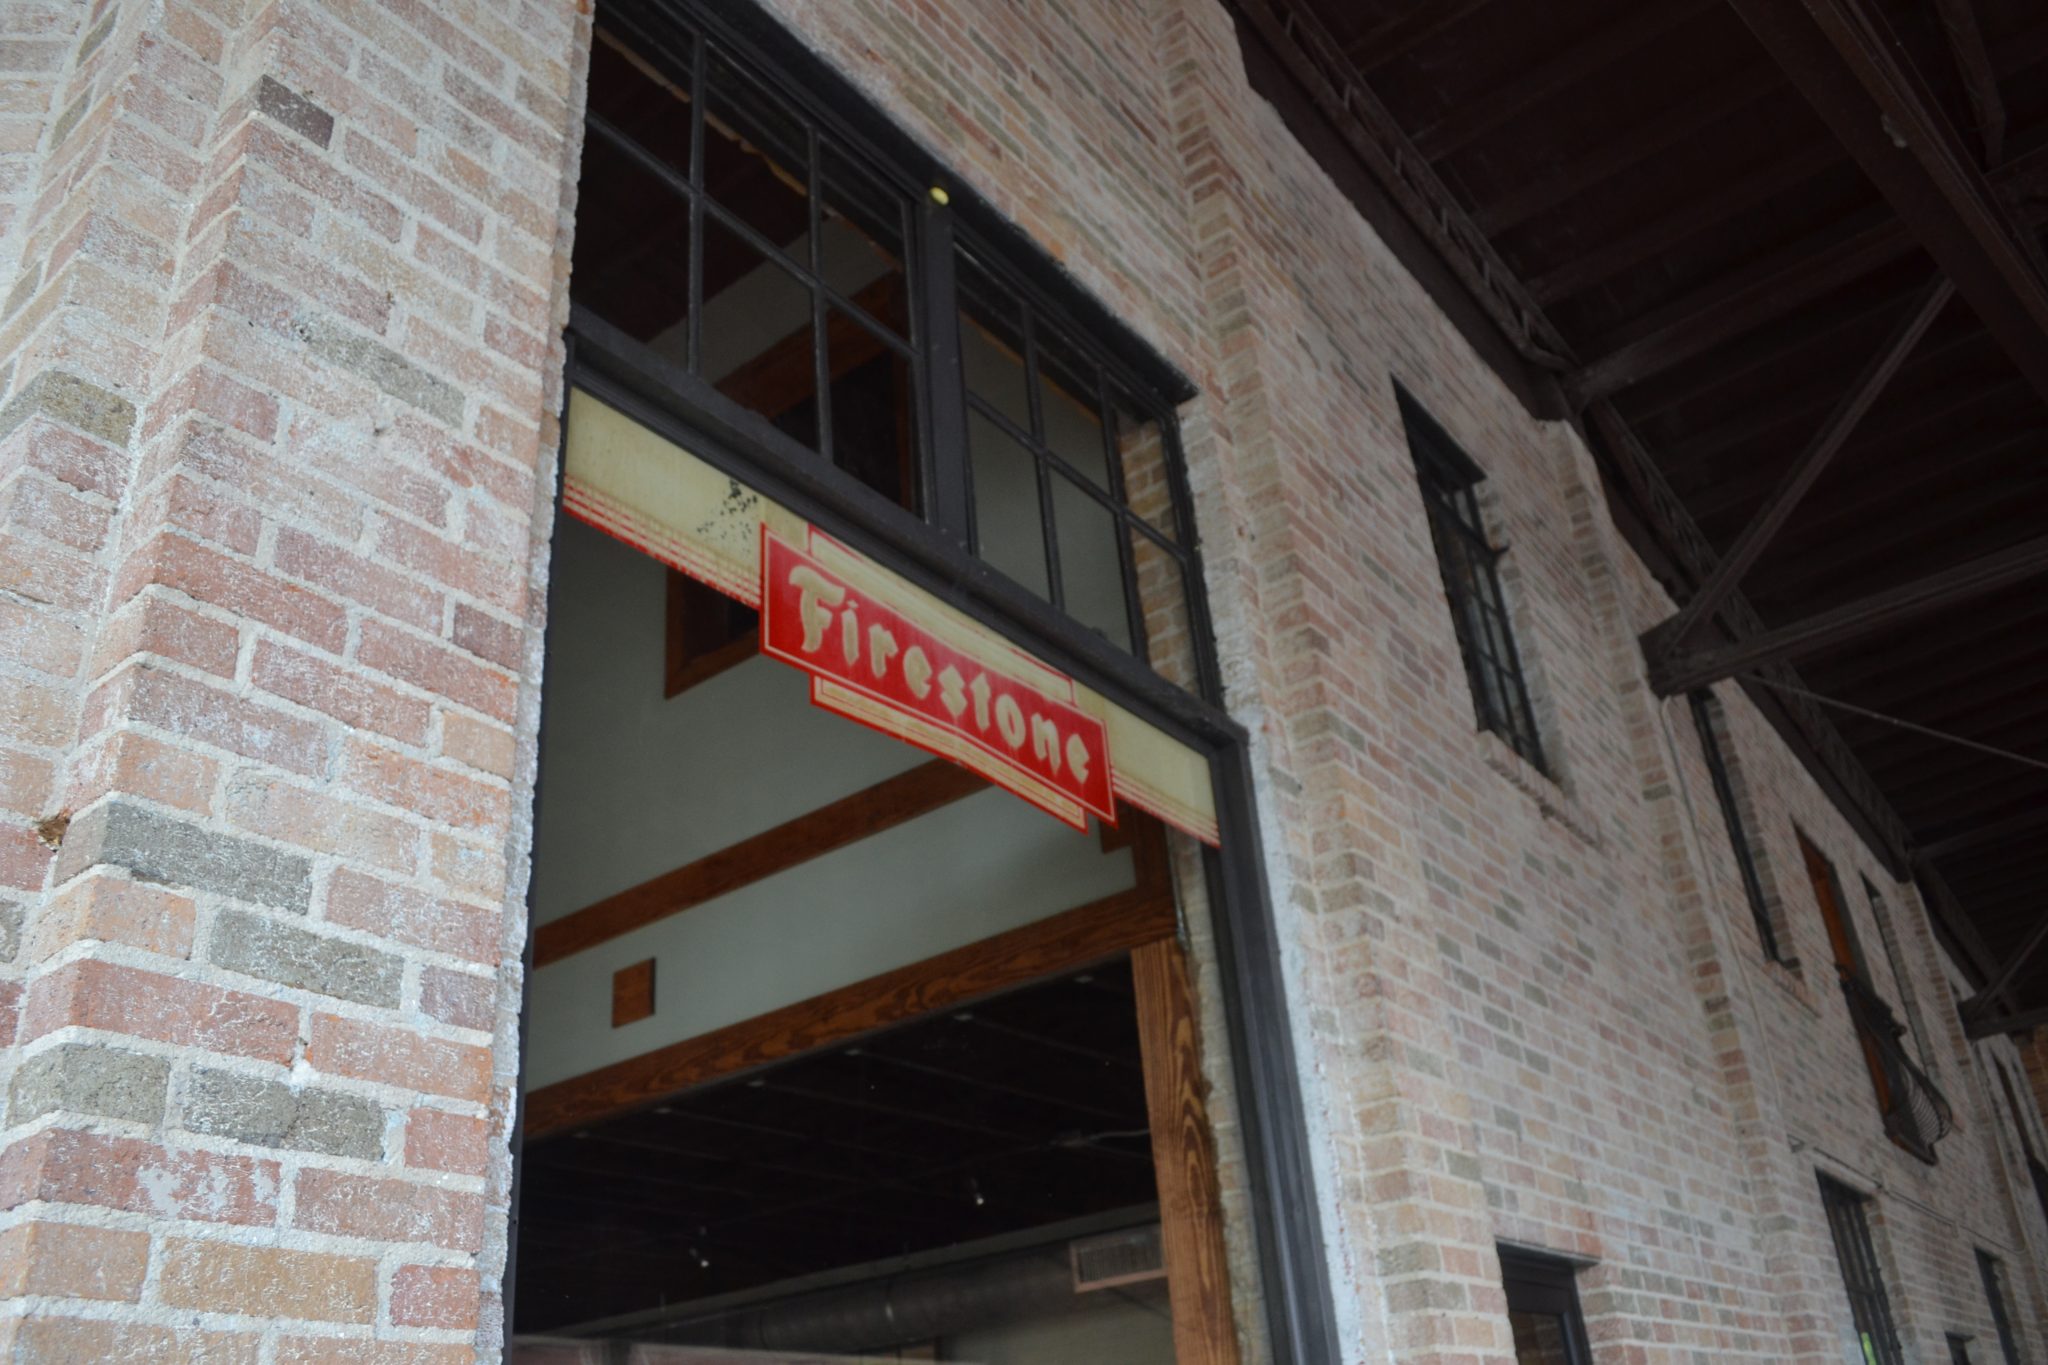 Office Space: Sharpspring's Firestone Tire Building